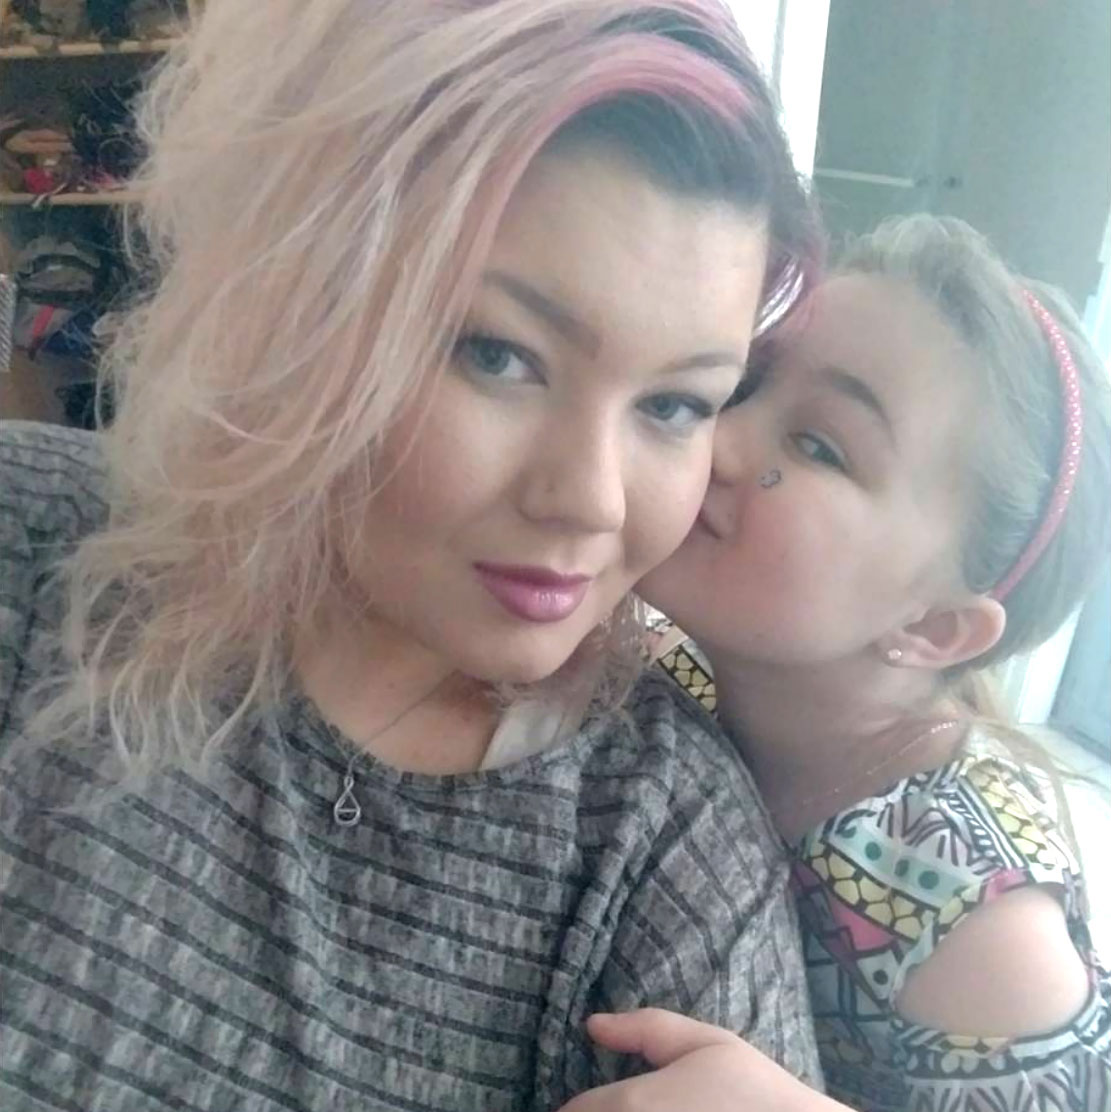 Amber Portwood Shares New Selfies With Daughter Leah After Arrest